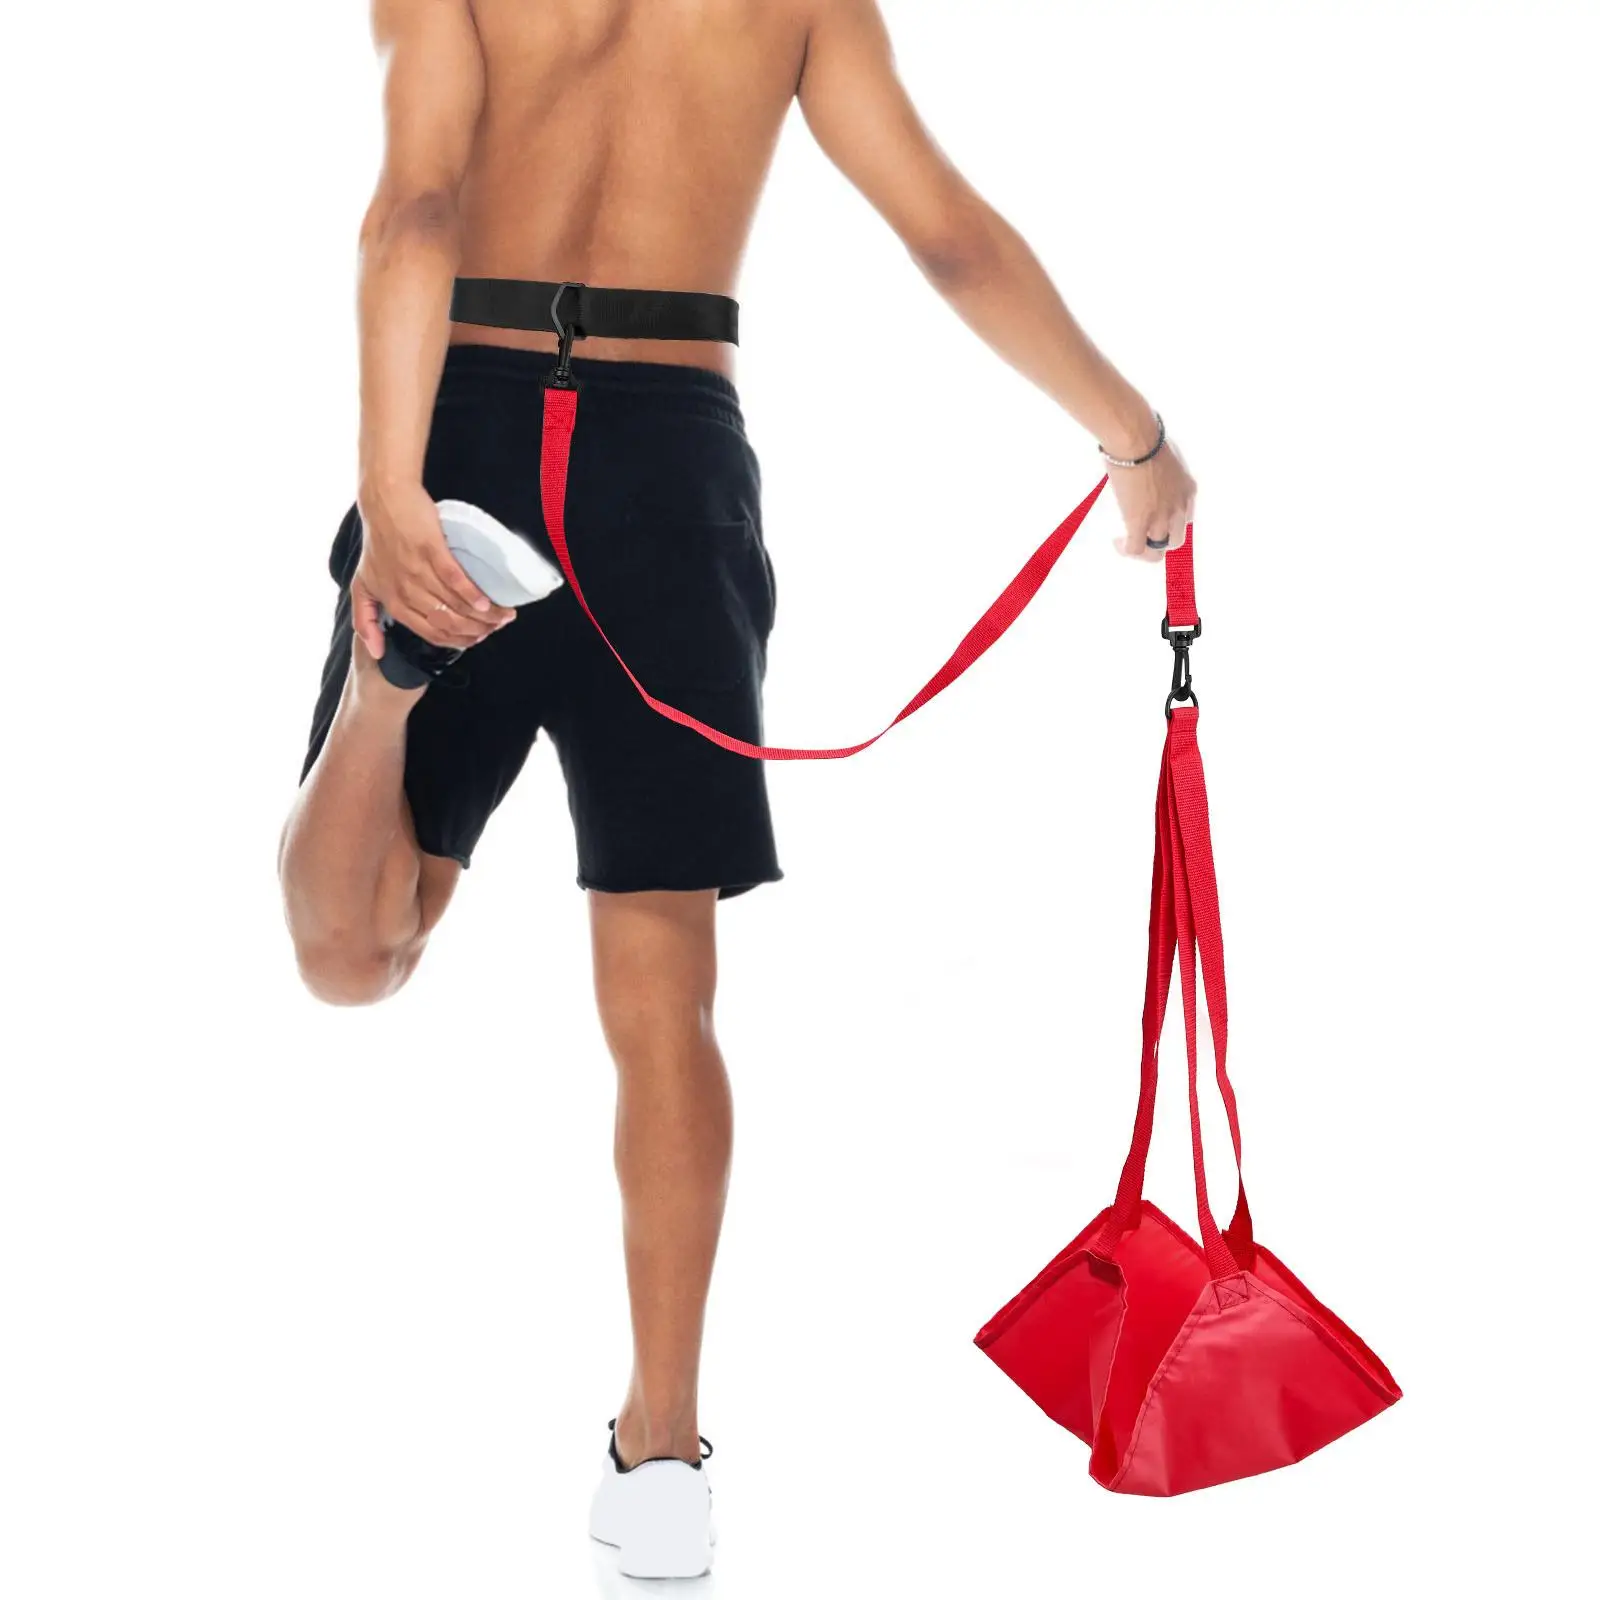 Swim Parachute Device Agility Training Fitness Trainer Resistance Cord Swimming